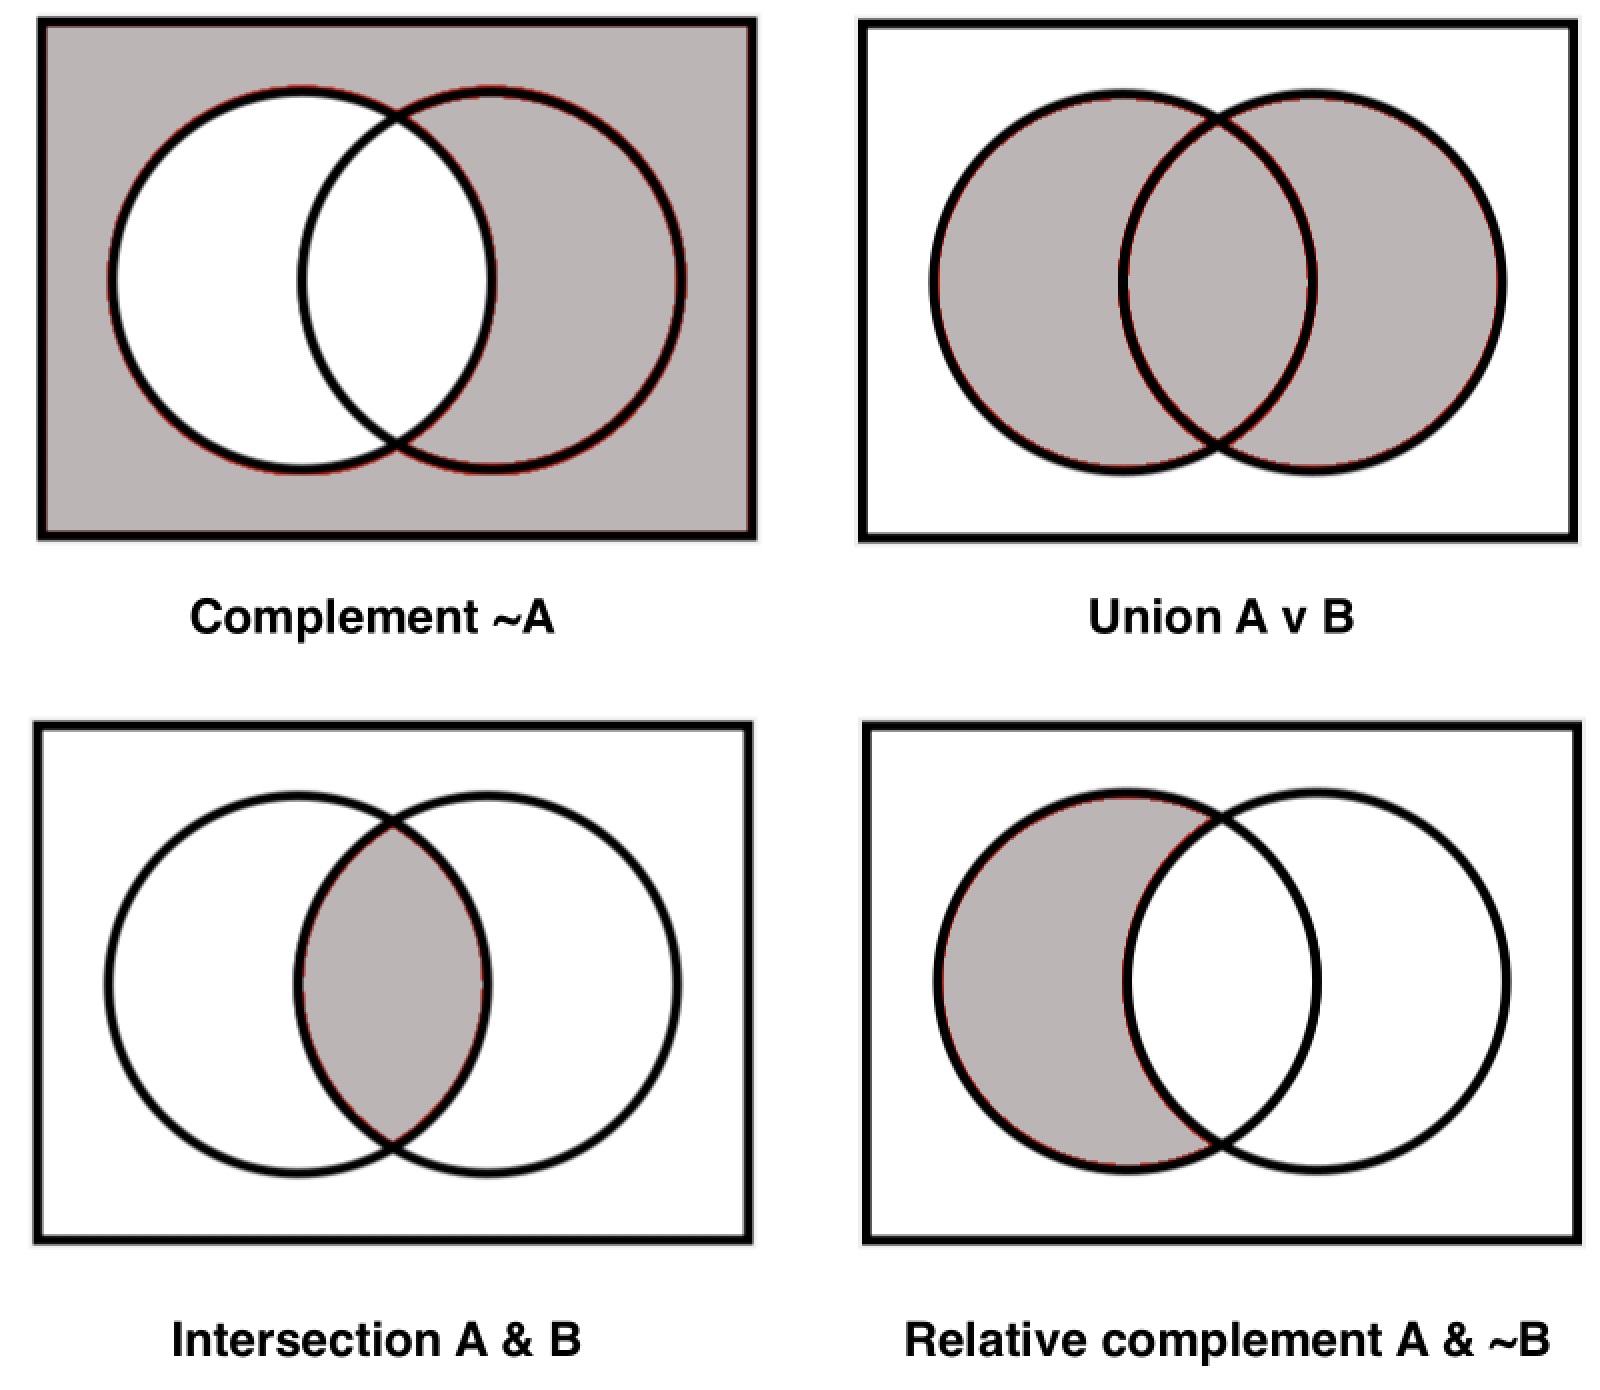 Venn Diagram Comparing Constitutions.pdf Answers / Urban Science Free Full Text How Does The Urban Environment Affect Health And Well Being A Systematic Review Html / Venn diagrams questions answer and the students should draw these formulas on venn diagrams.